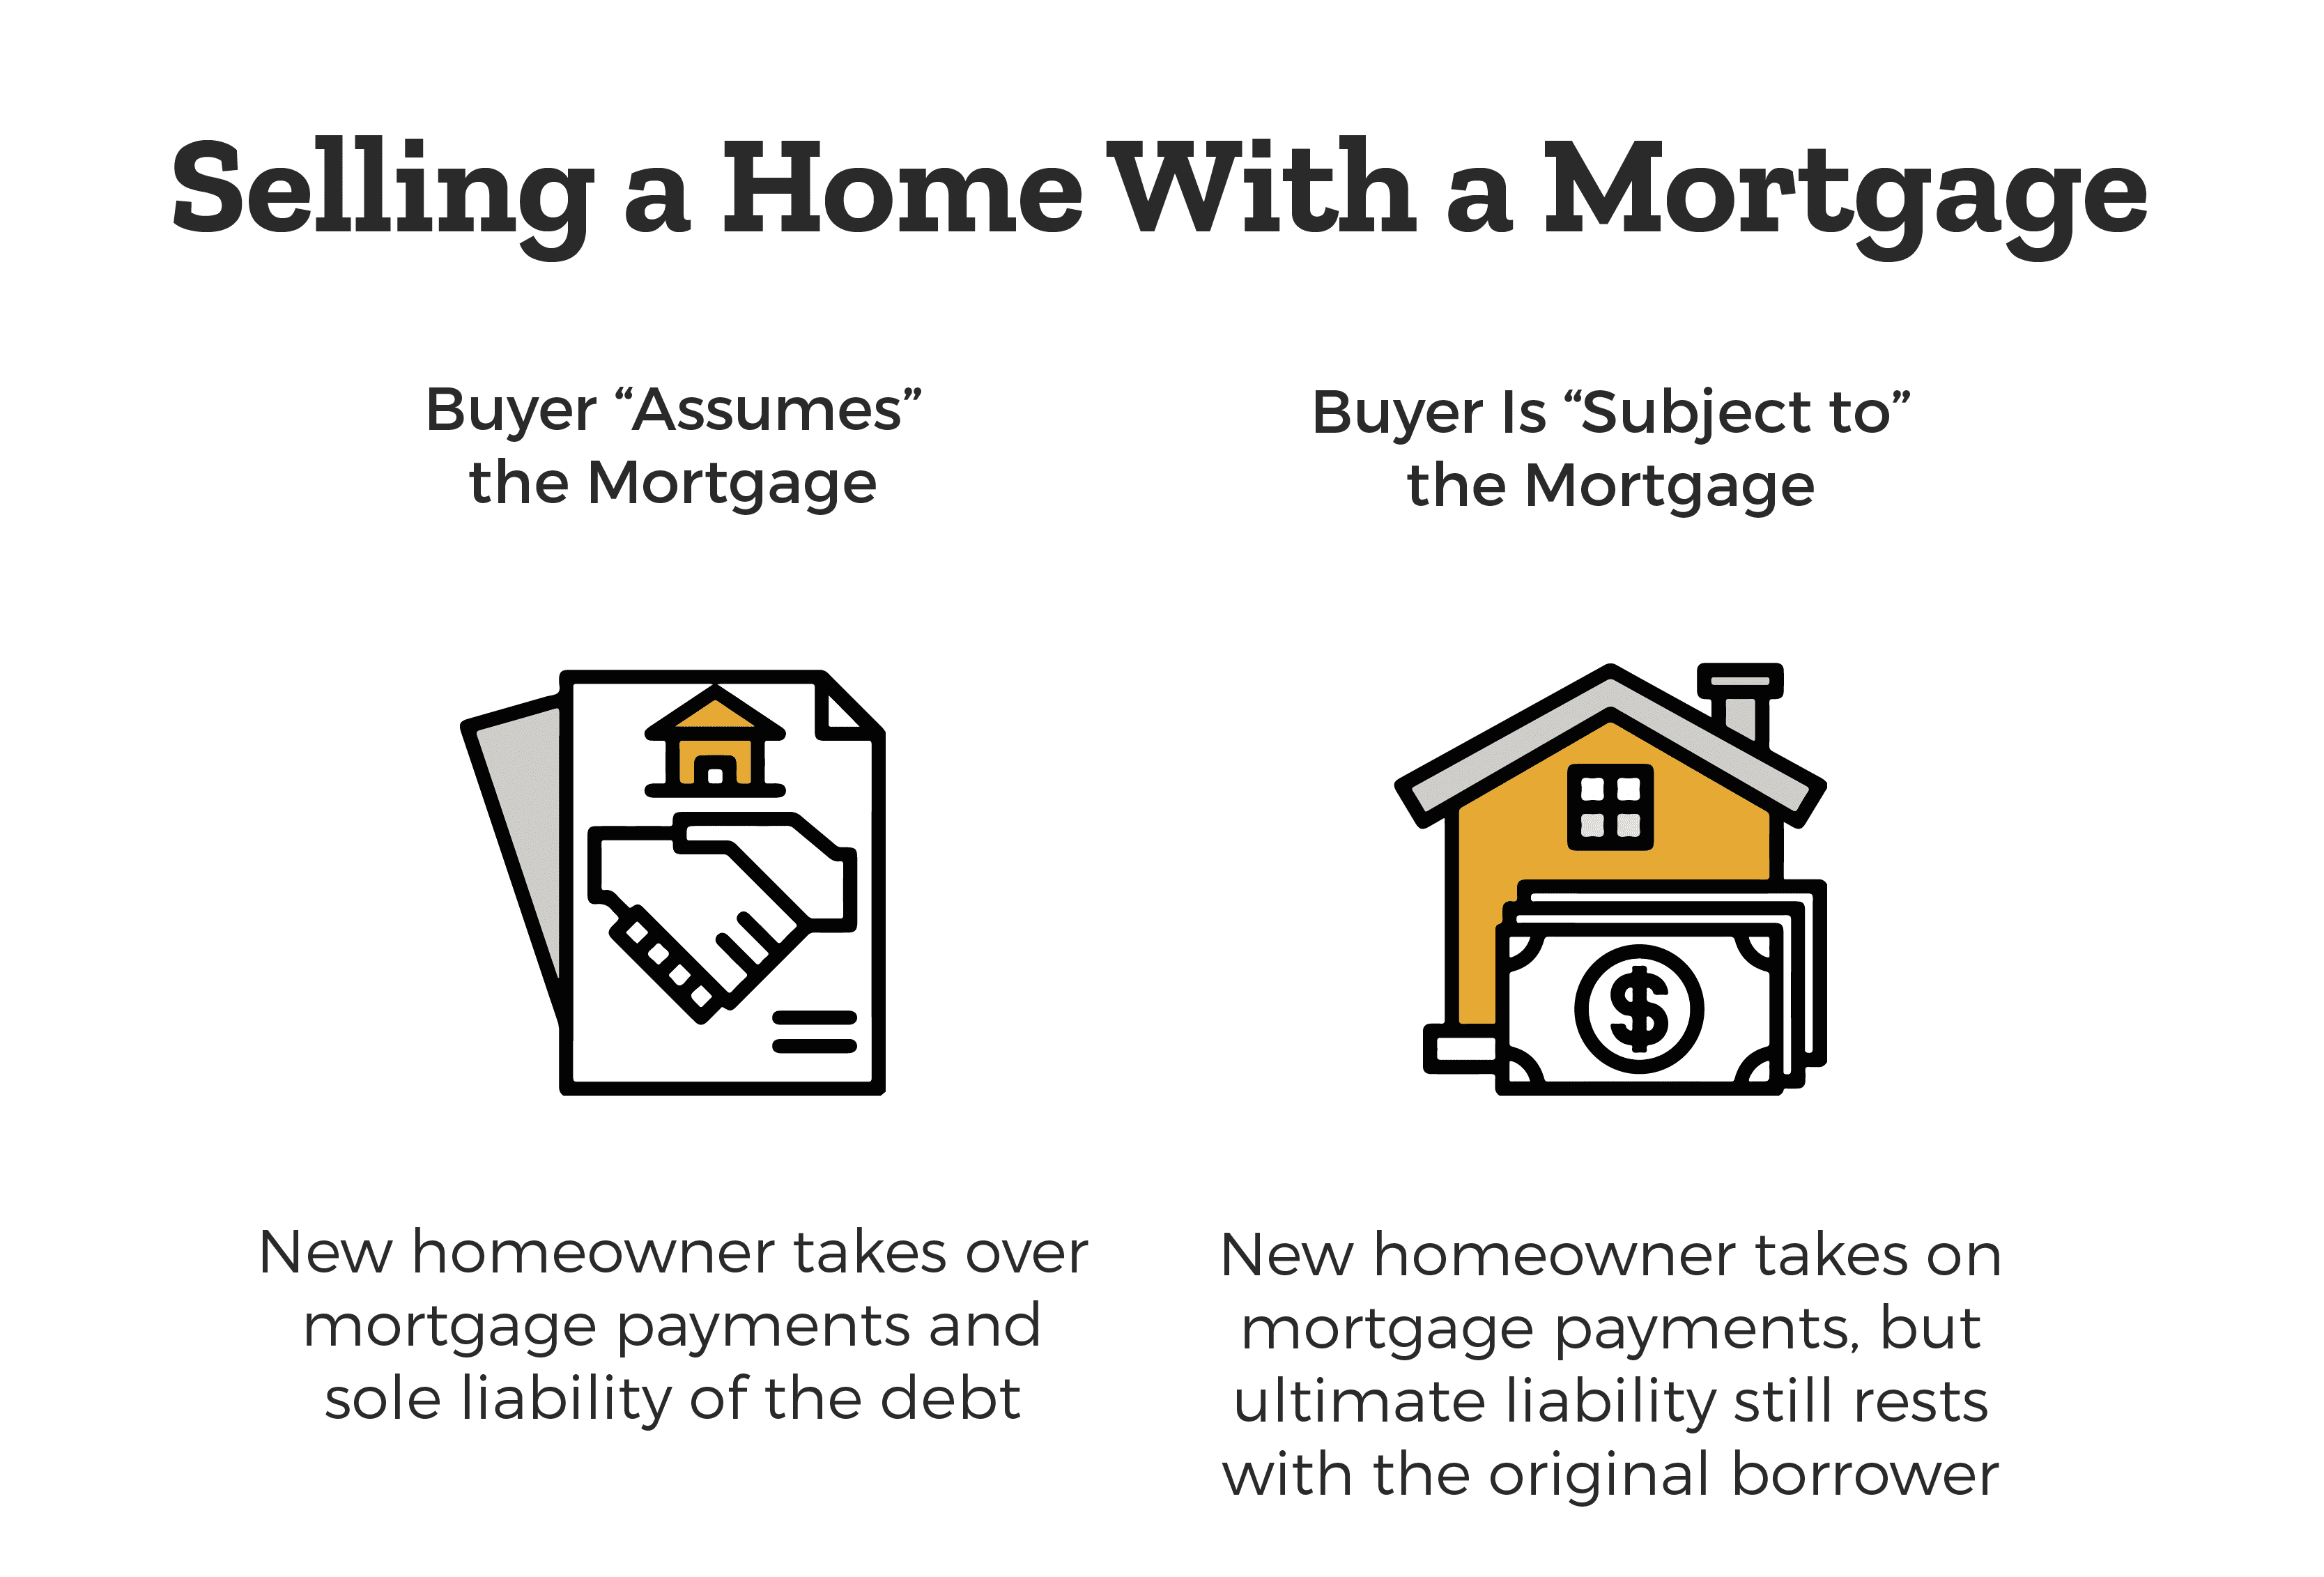 selling-home-with-a-mortgage-assuming-mortgage-versus-subject-to-mortgage